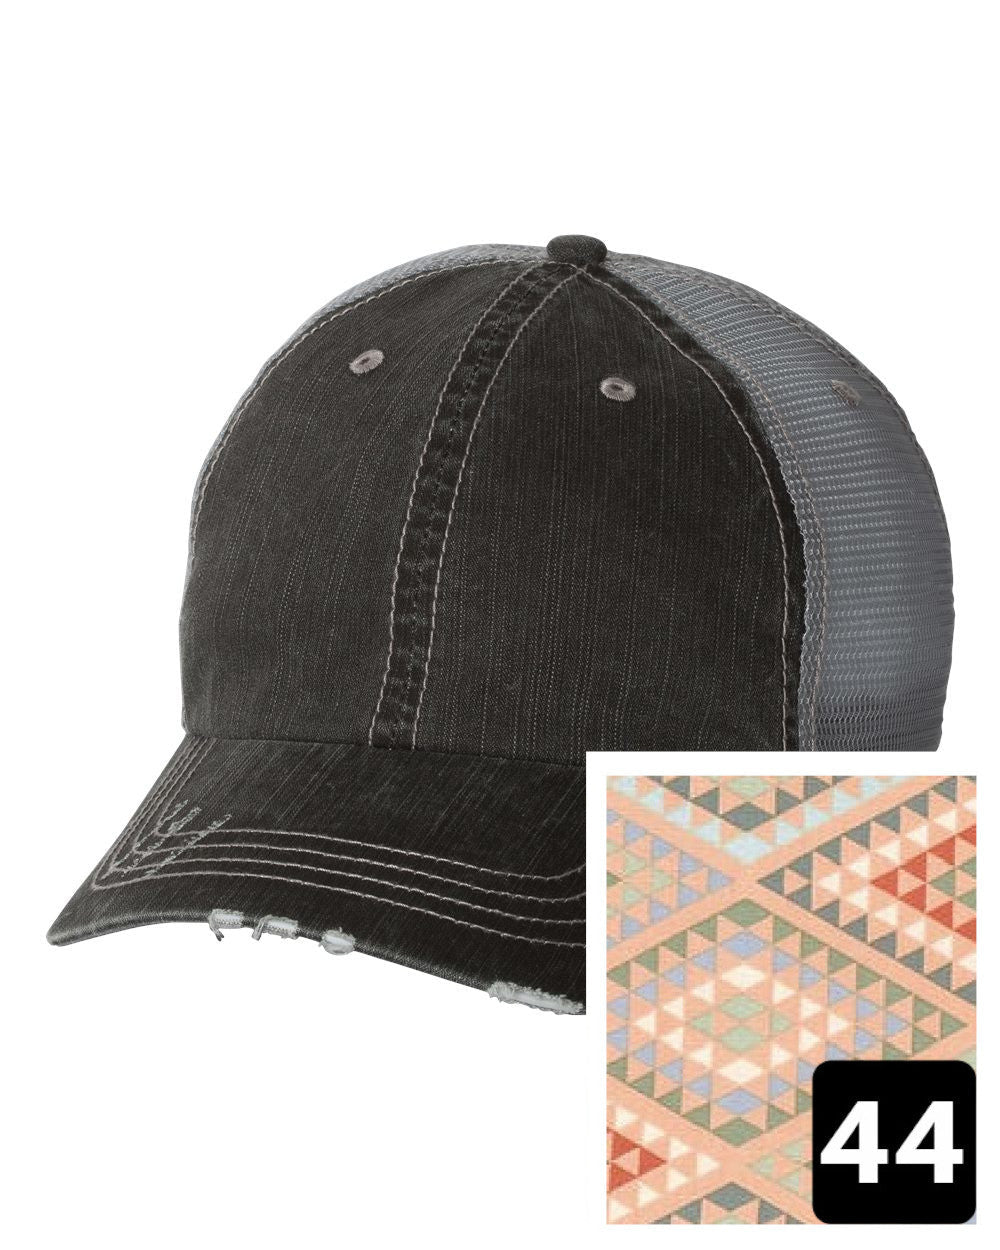 gray distressed trucker hat with navy coral and white chevron fabric state of Virginia